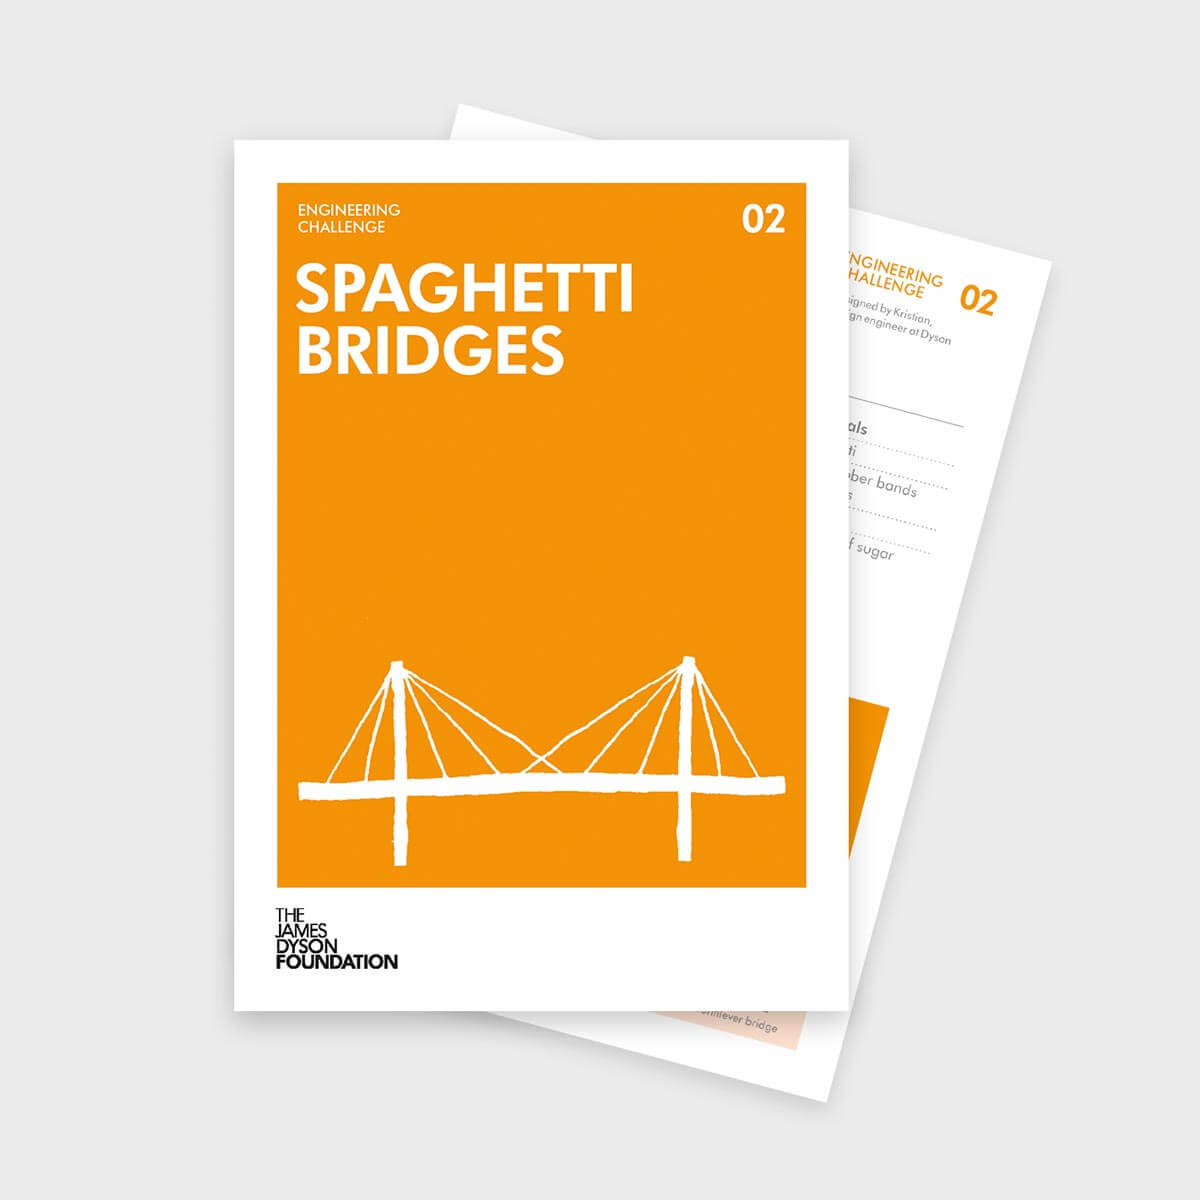 Image of the front of the Spaghetti Bridges Challenge Cards